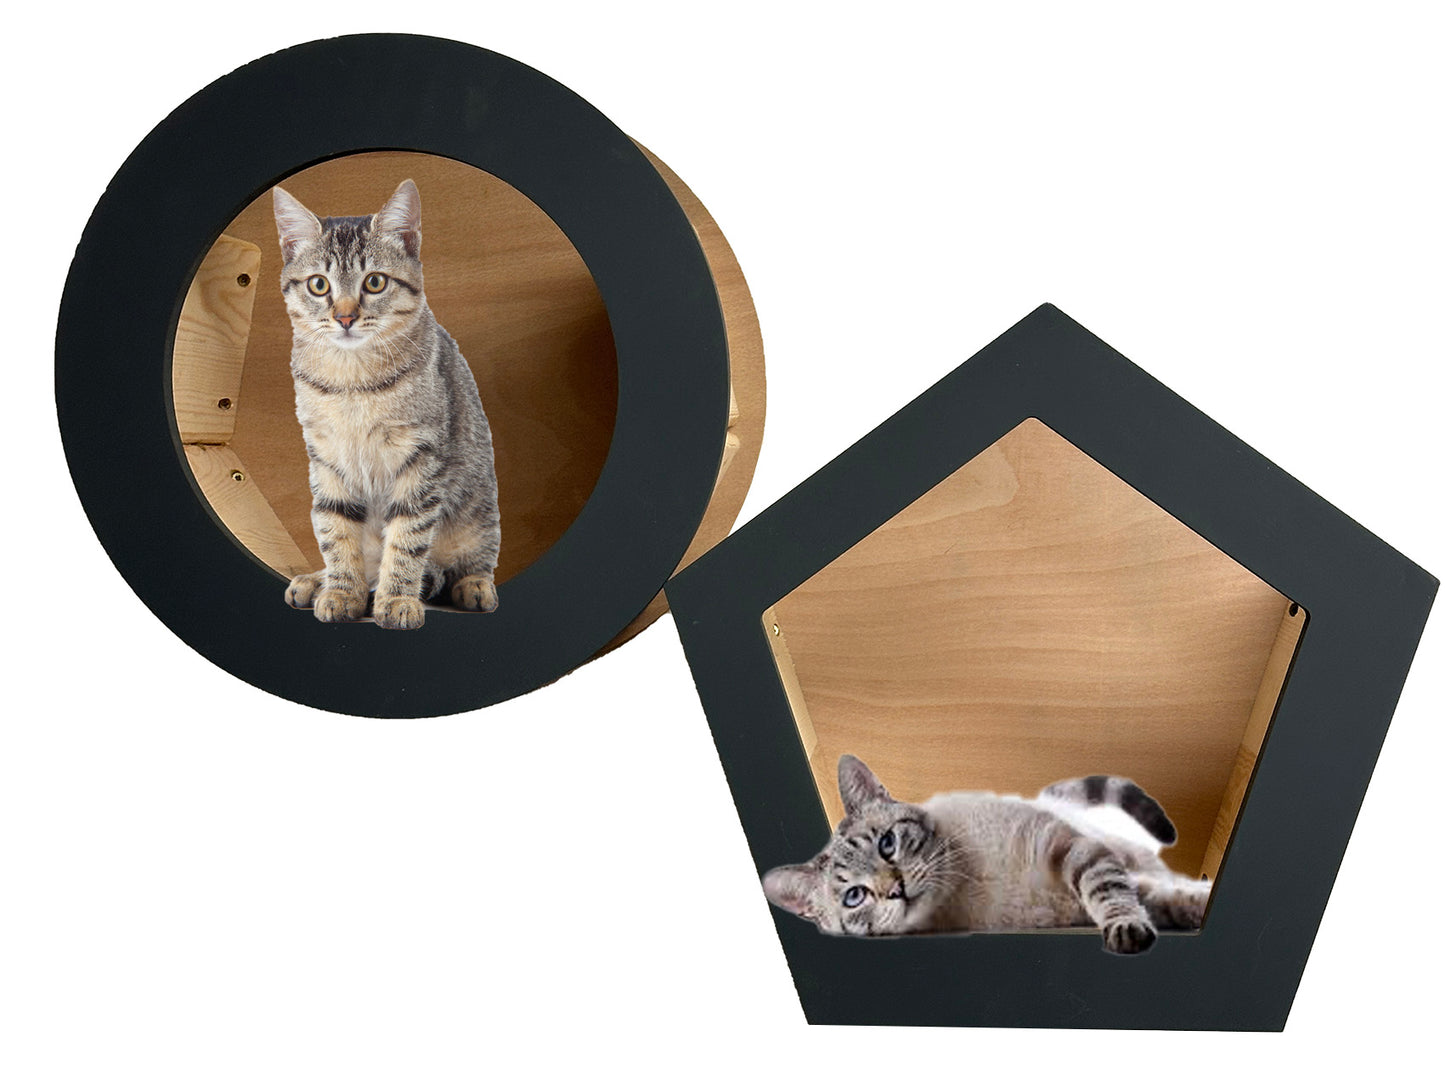 Cat wall houses, all you need to make your cat comfortable without looking like an eyesore